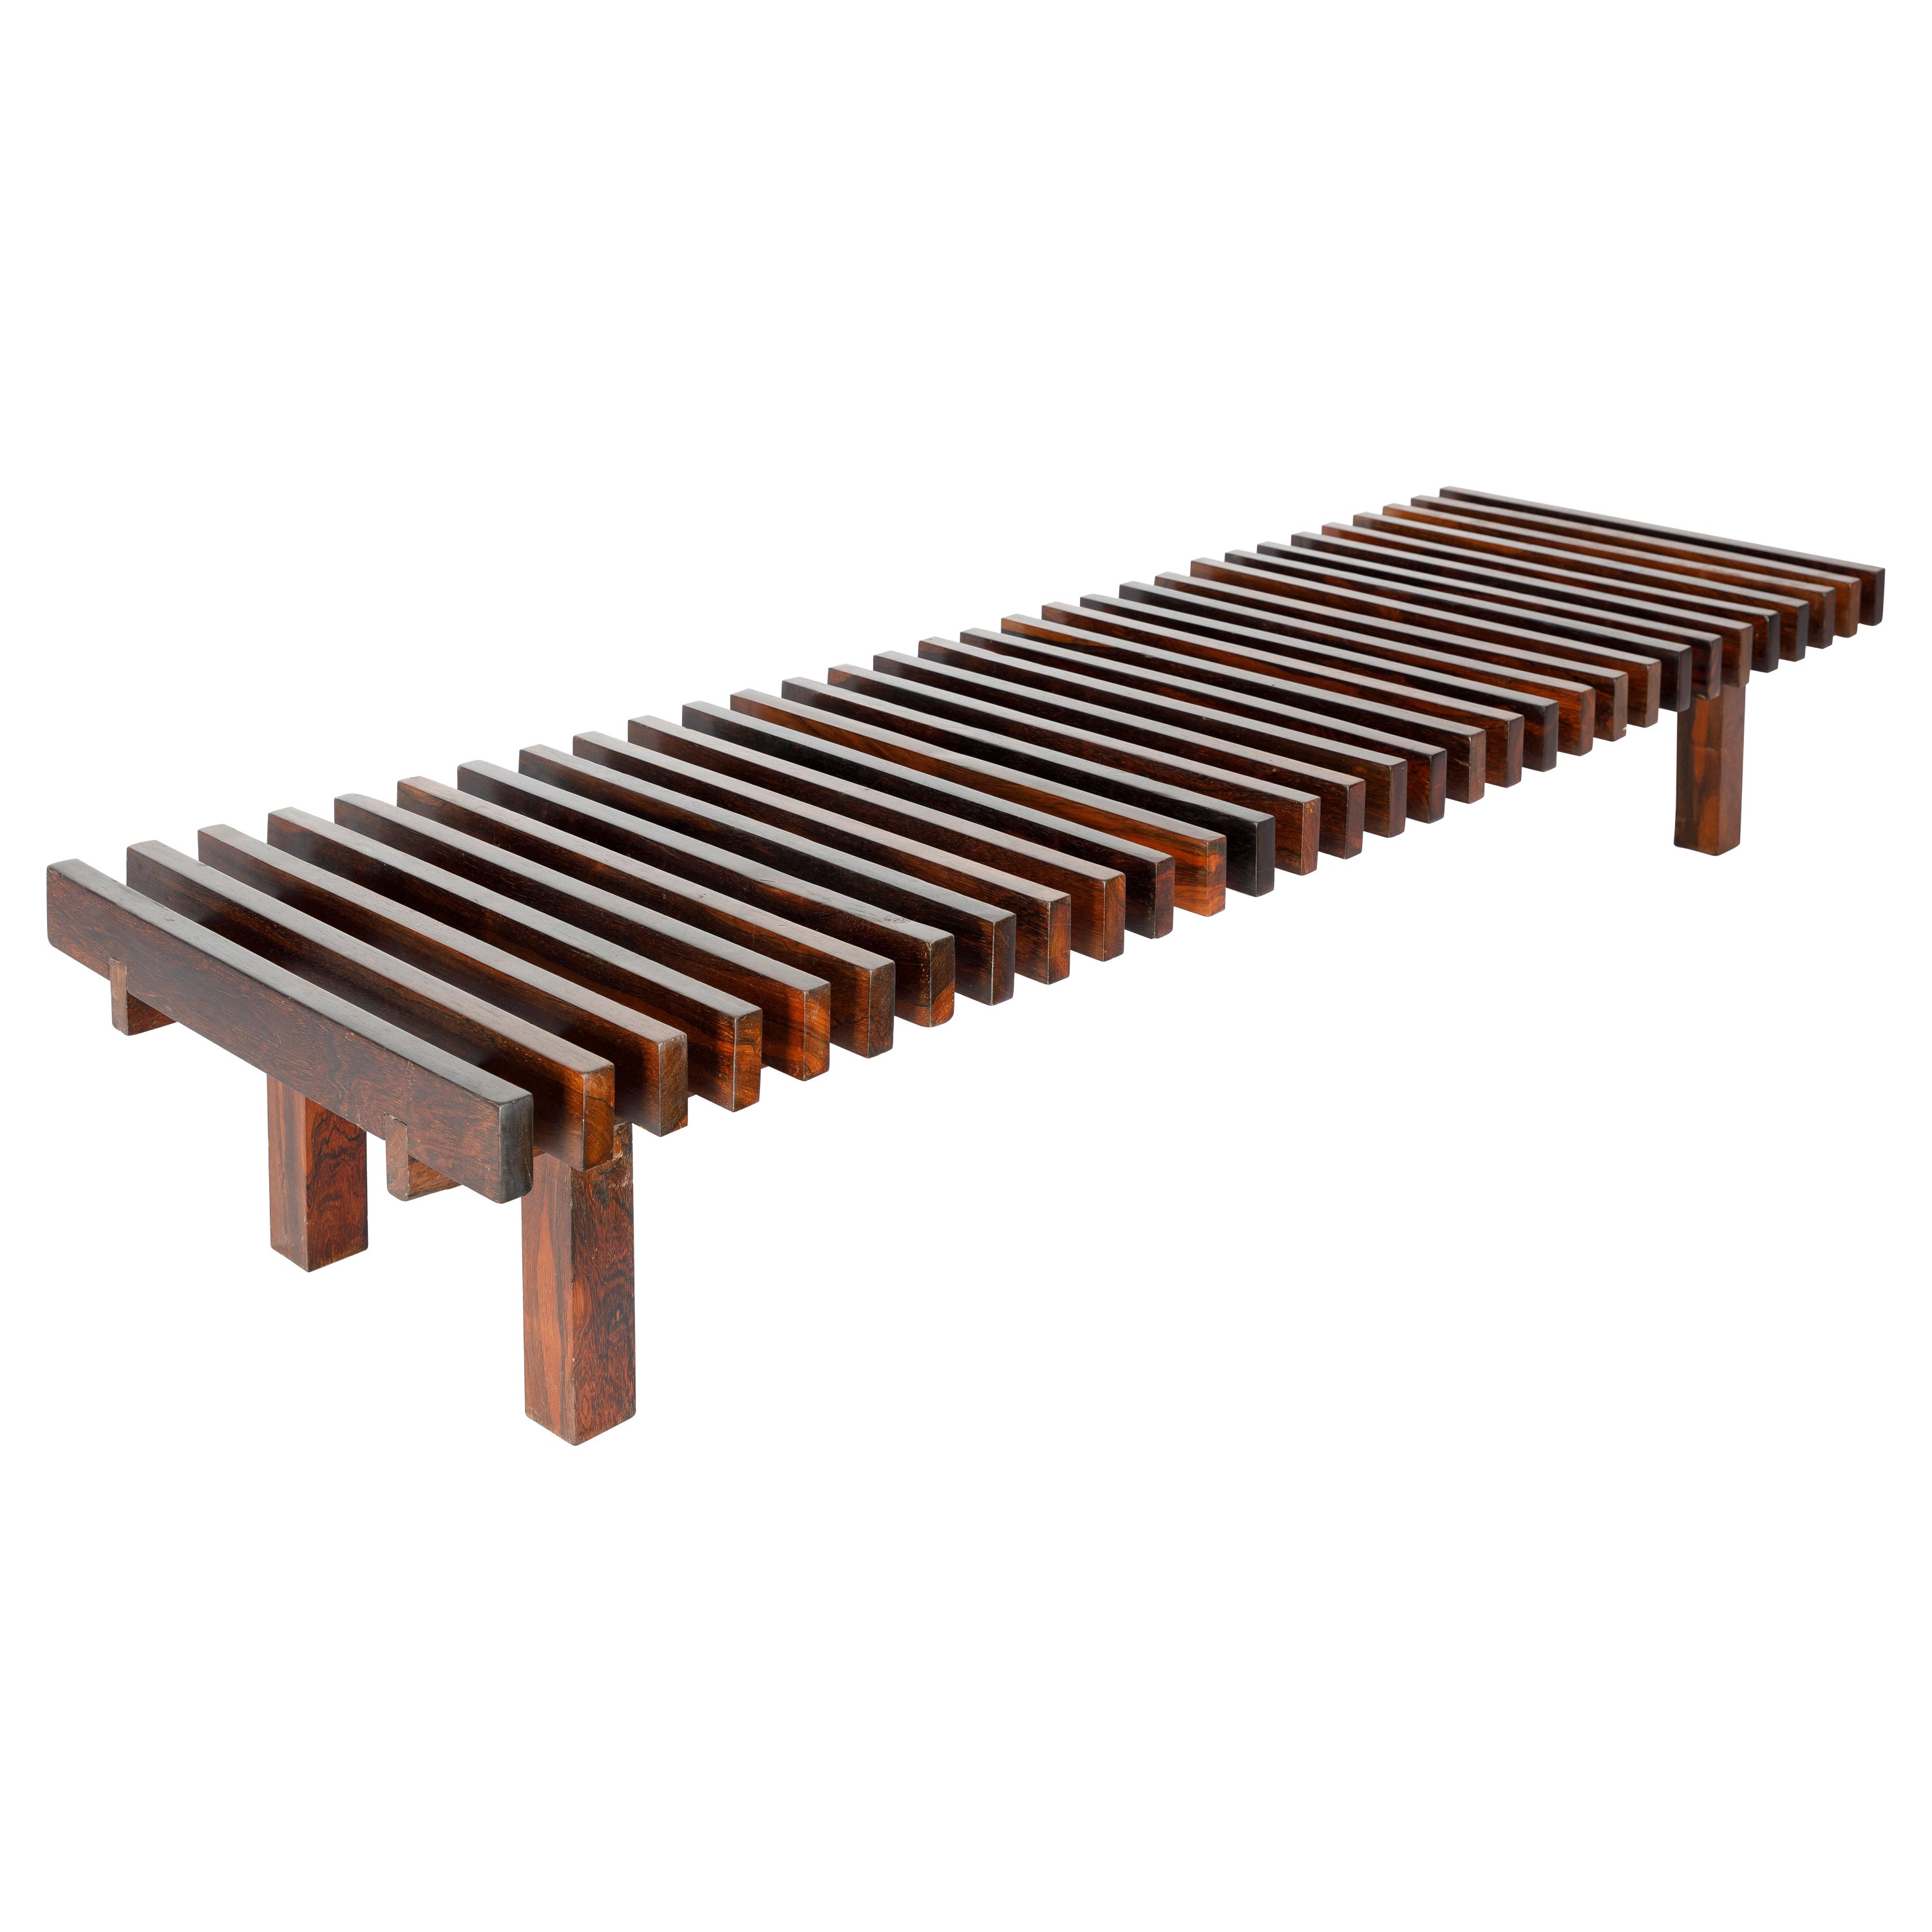 Mid-Century Modern Slatted Bench from Forma Manufacture, Brazil, 1970s